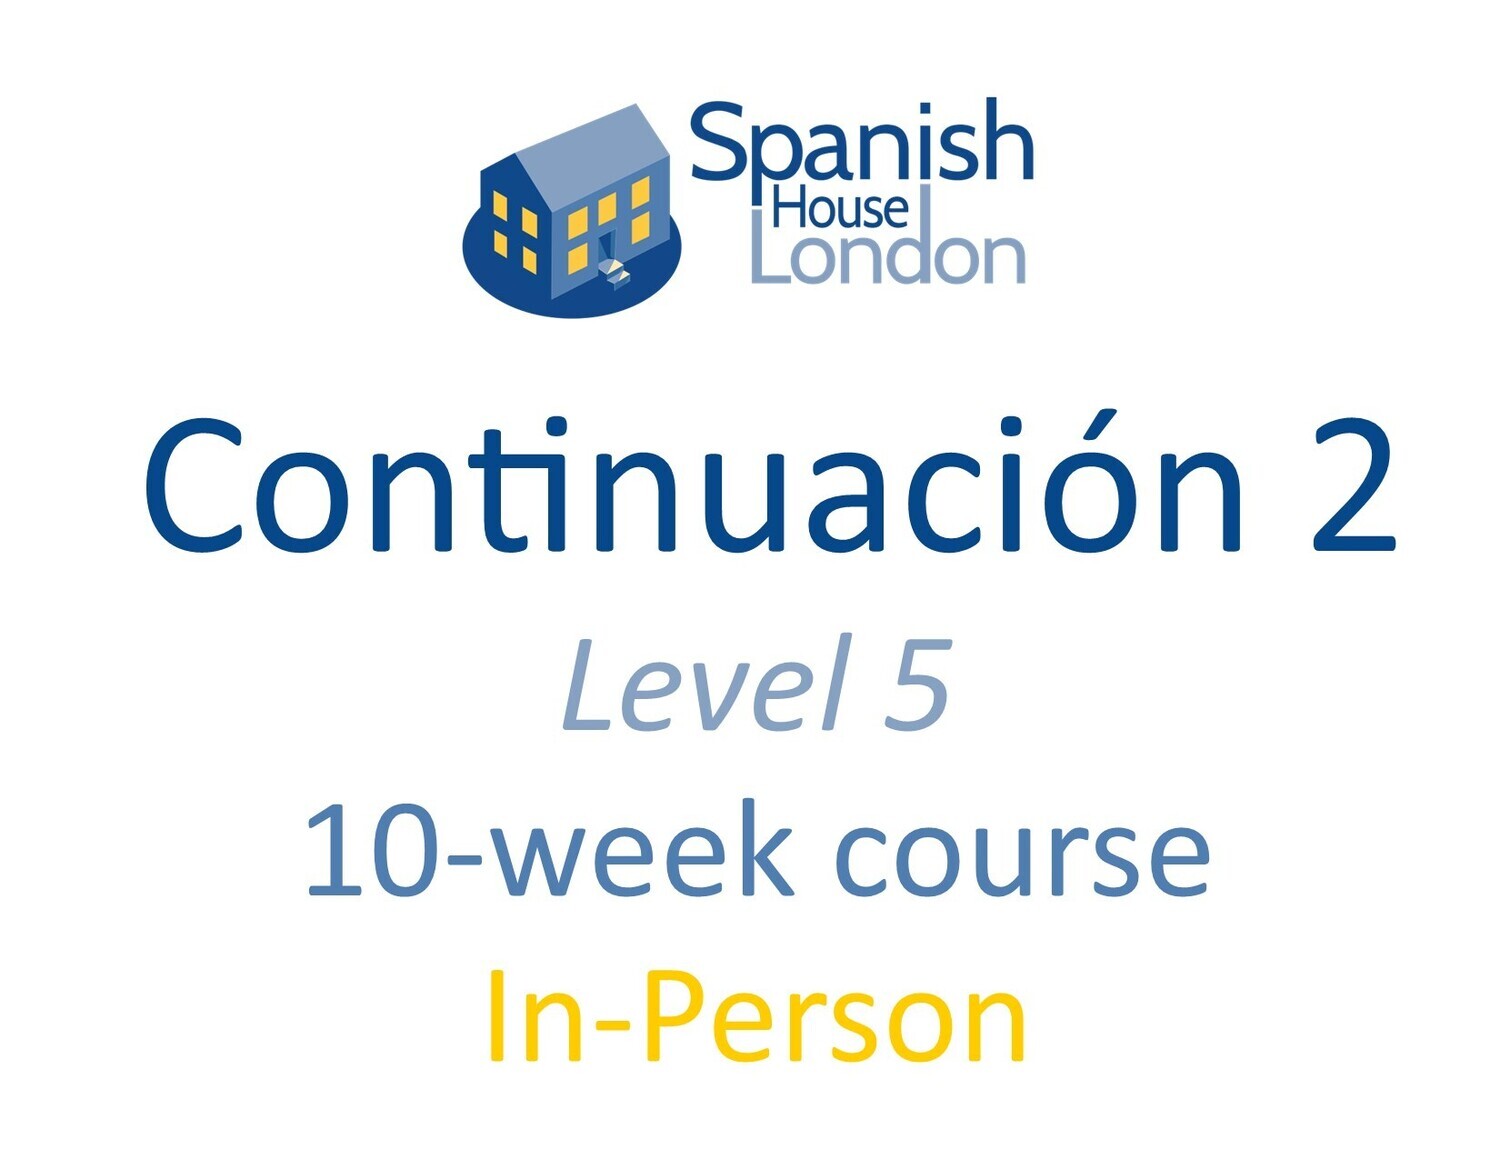 Continuacion 2 Course starting on 17th October at 6pm in Euston / King's Cross